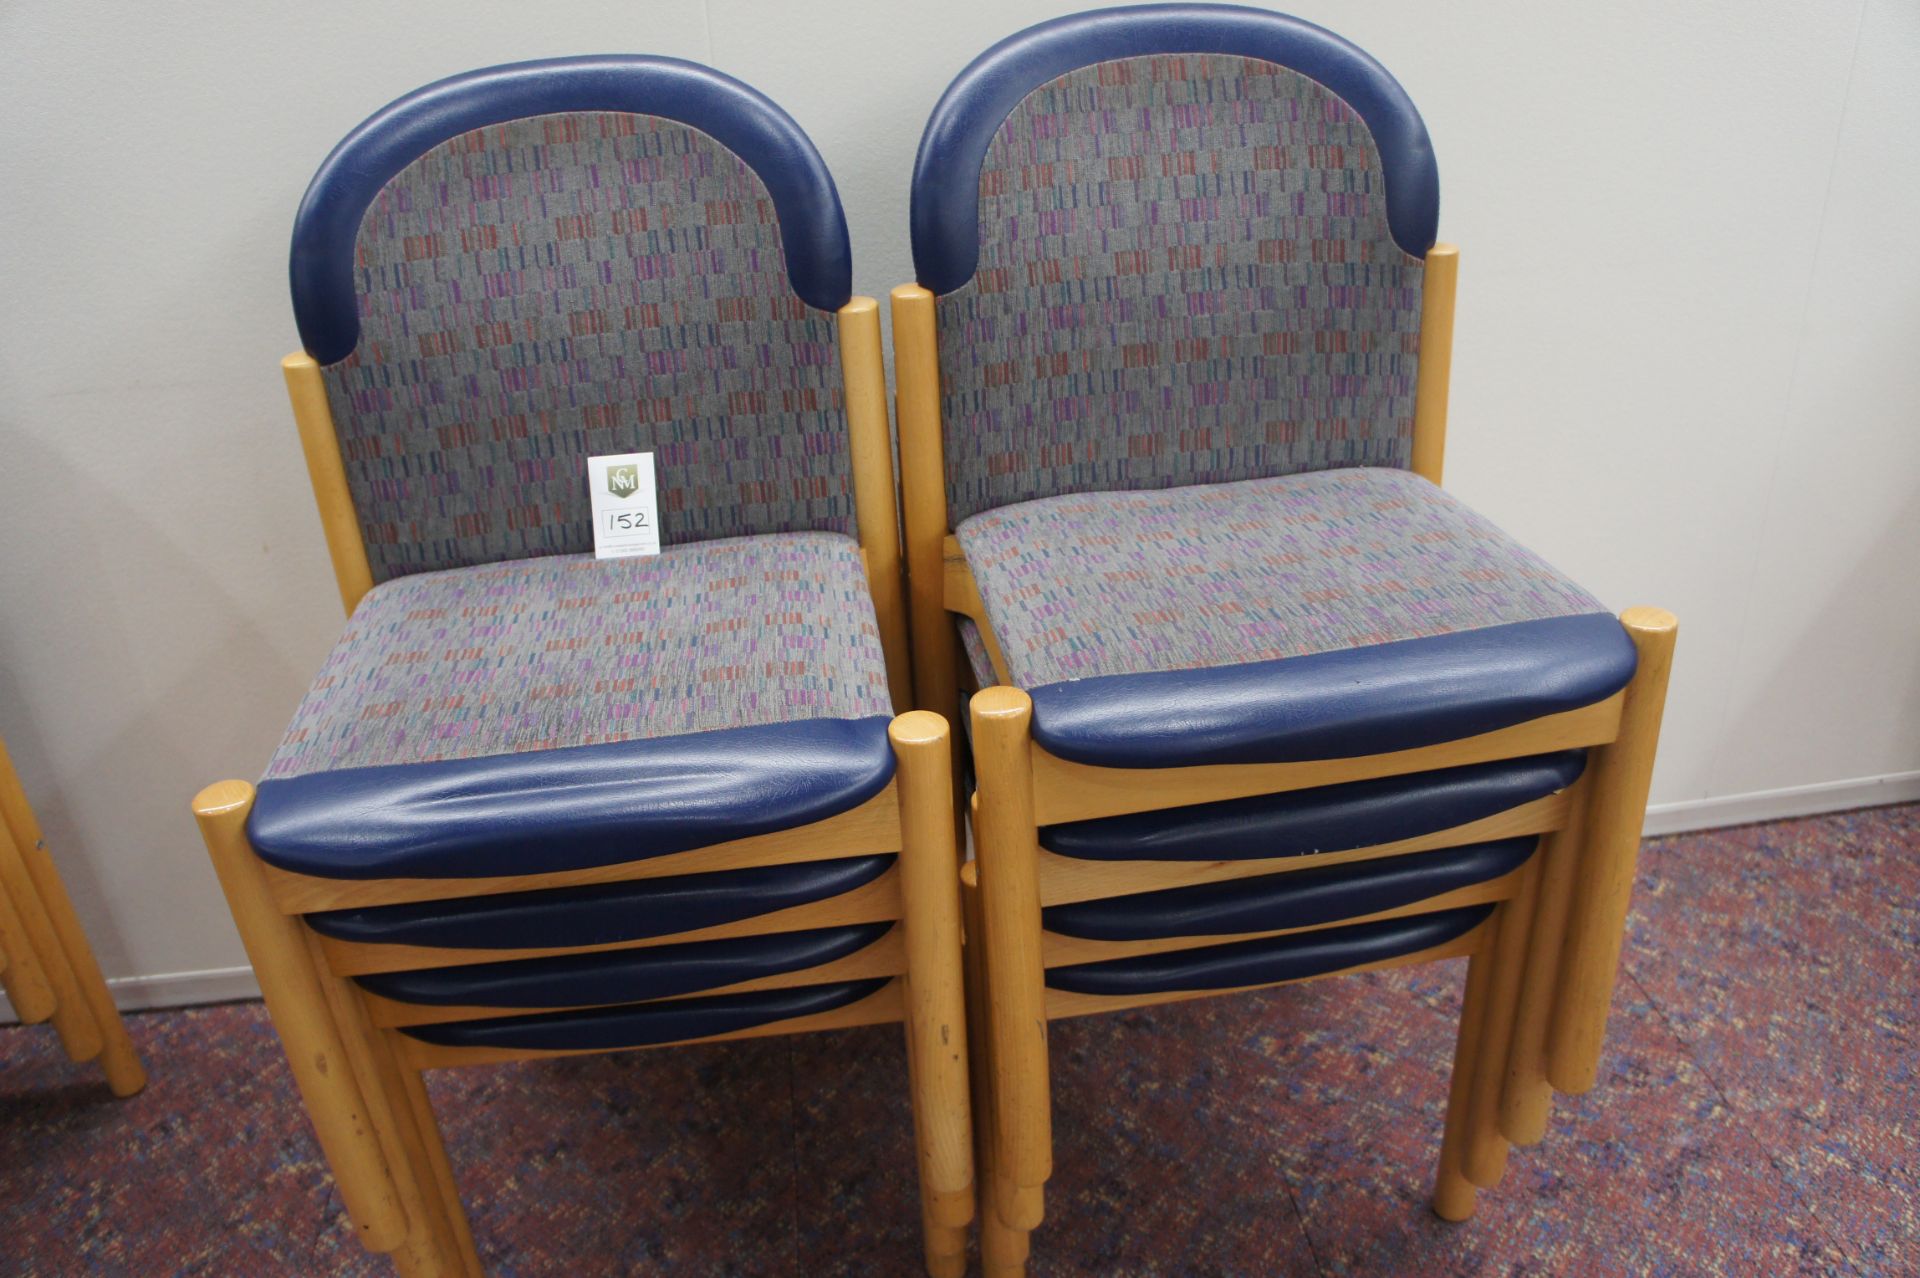 8 x timber frame chairs with padded seat and back rest